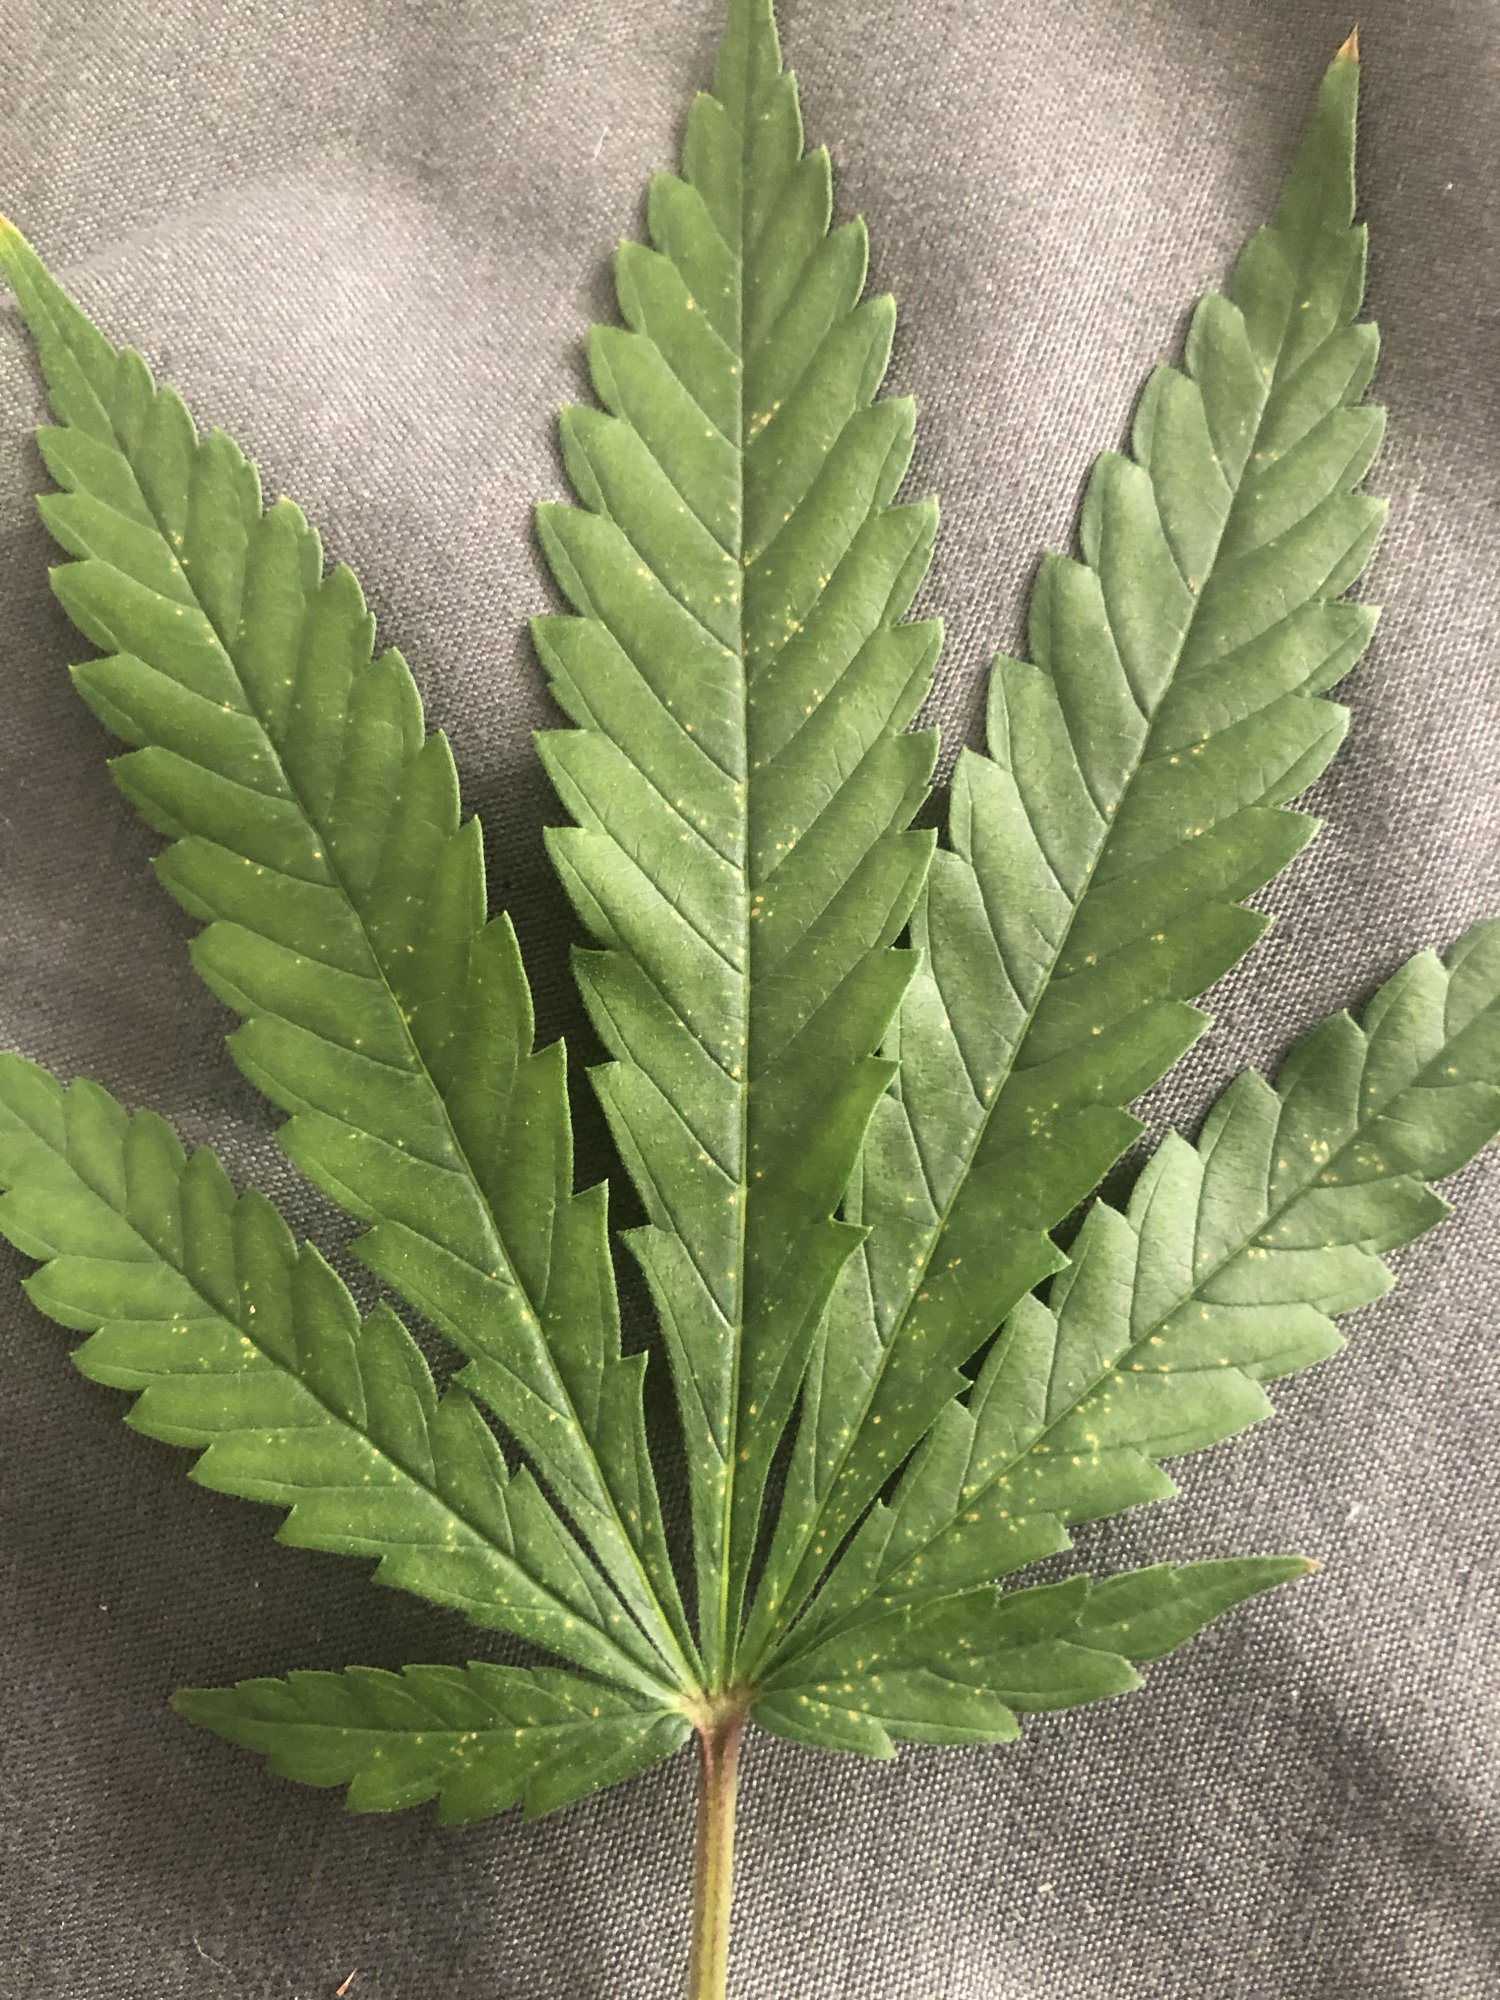 Need help diagnosing nutrient or pest issue in dwc 5